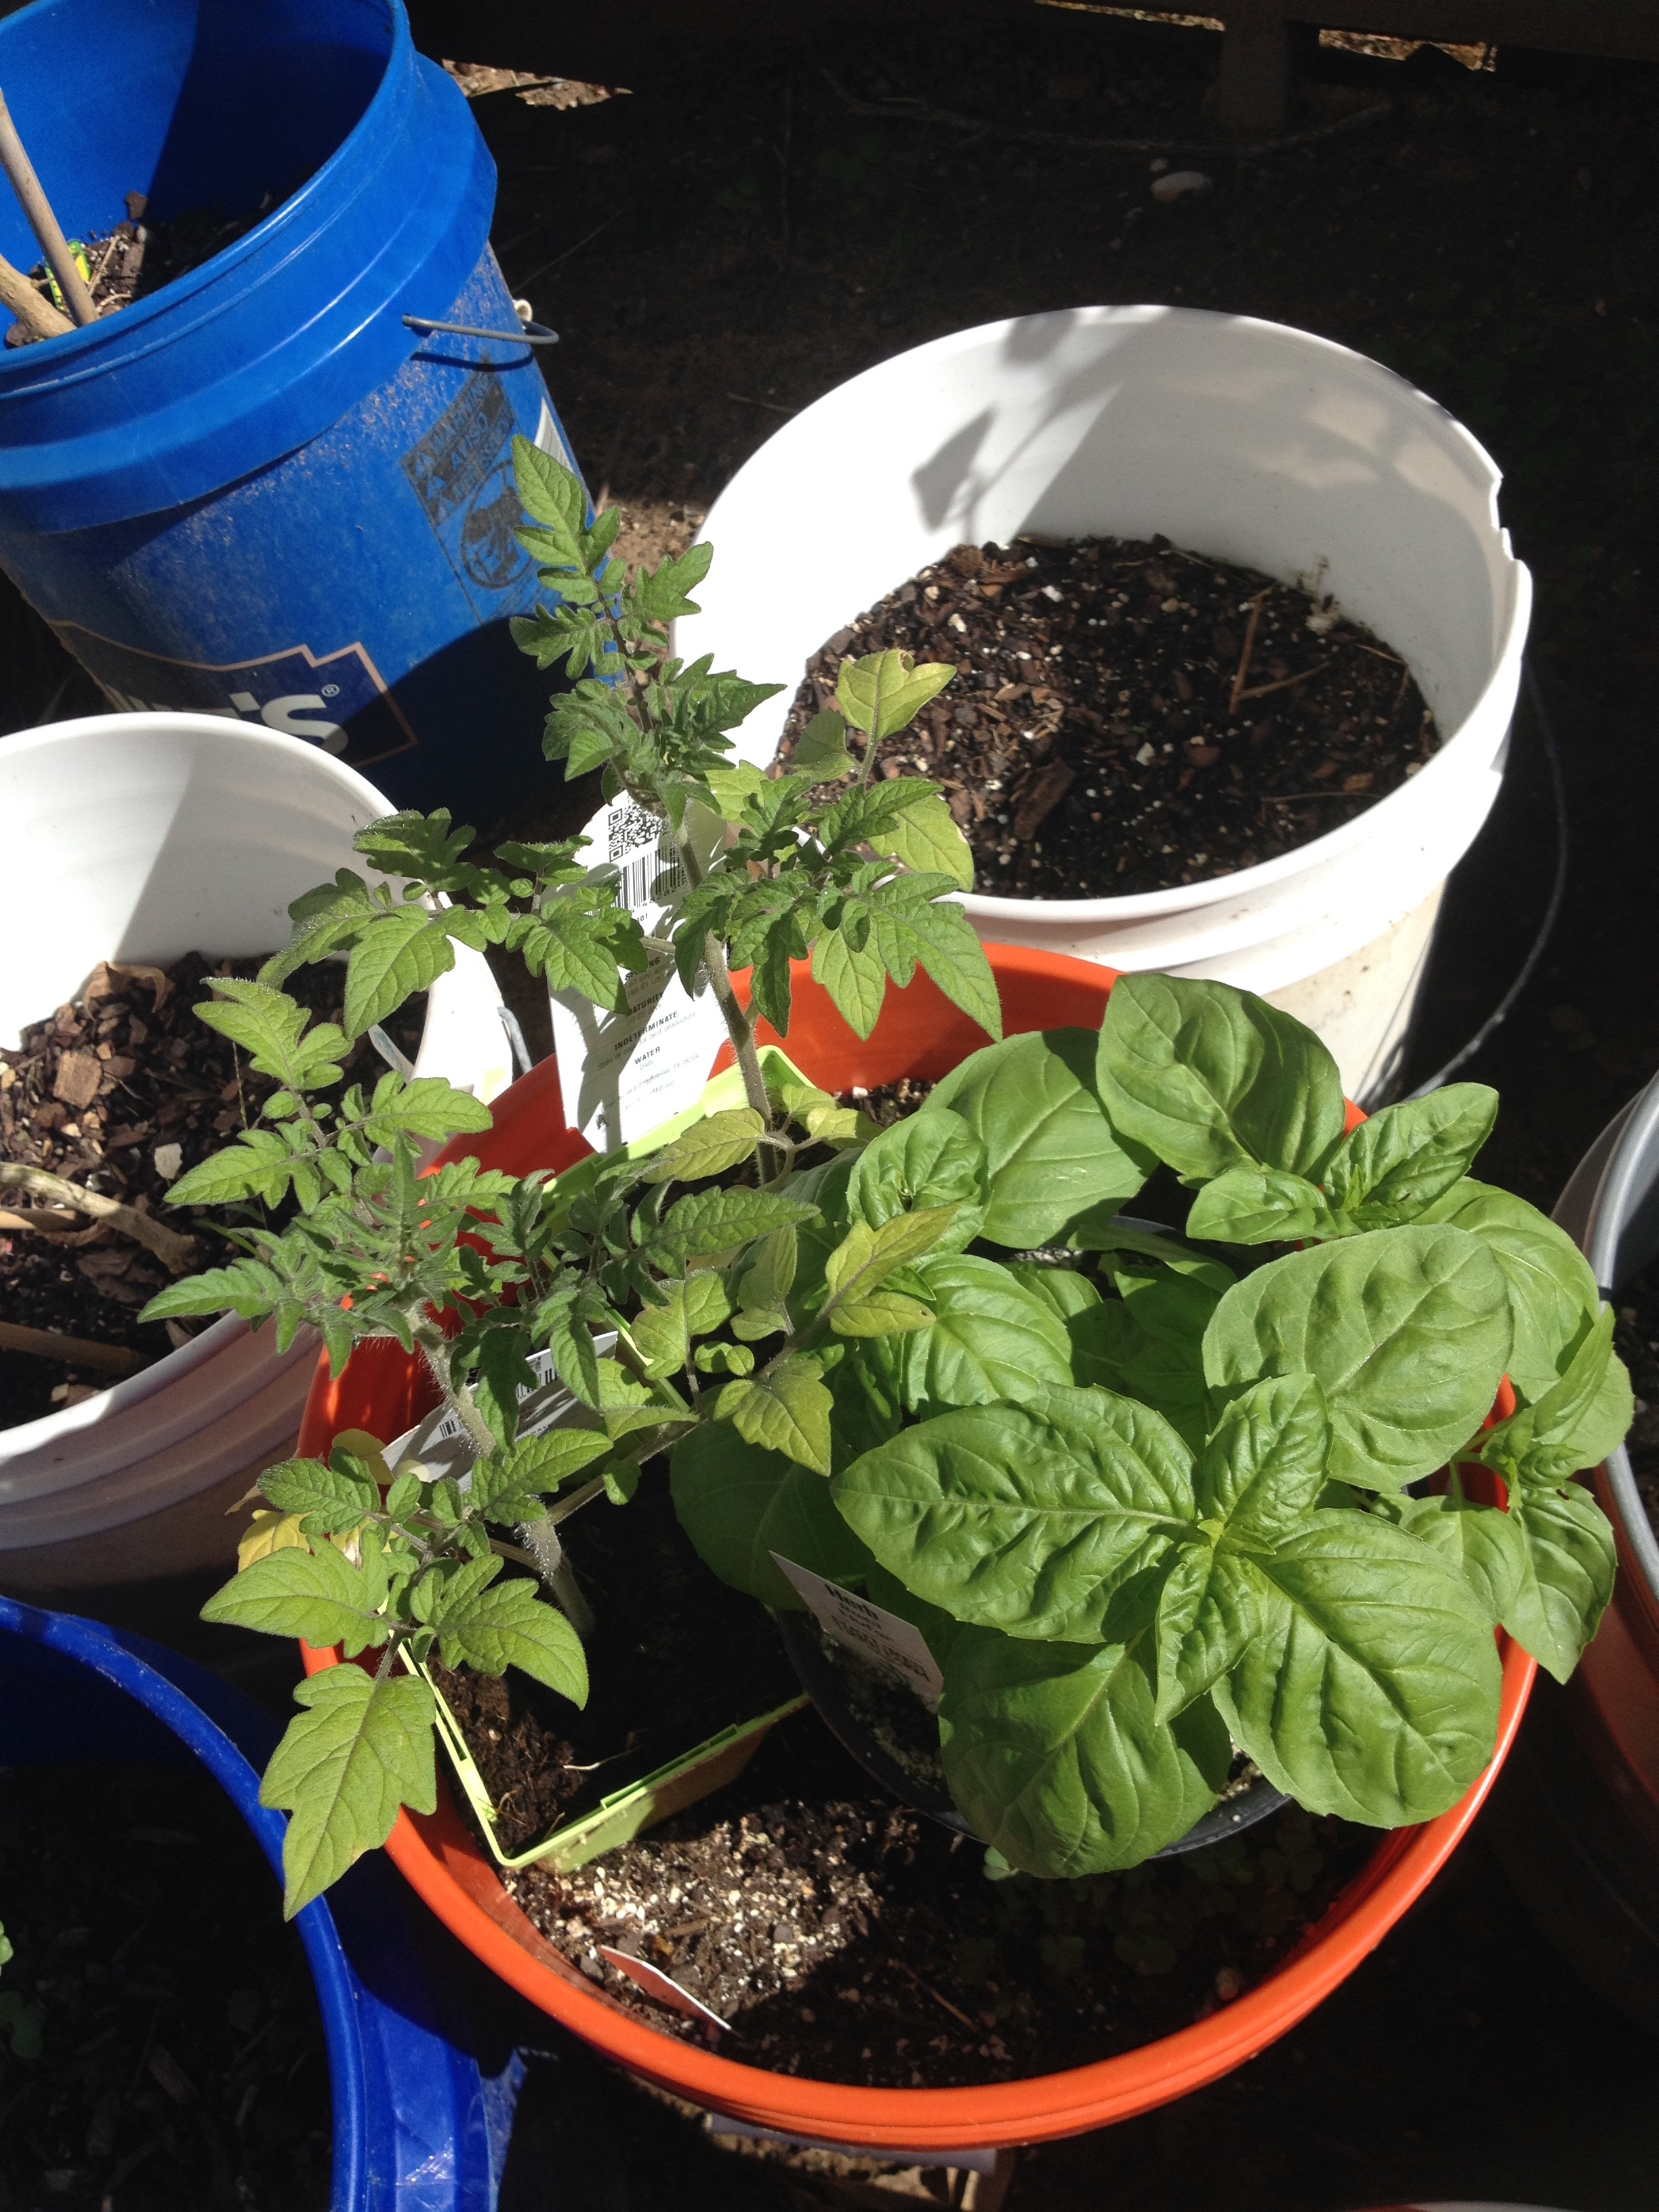 The new tomato and basil plants from HEB